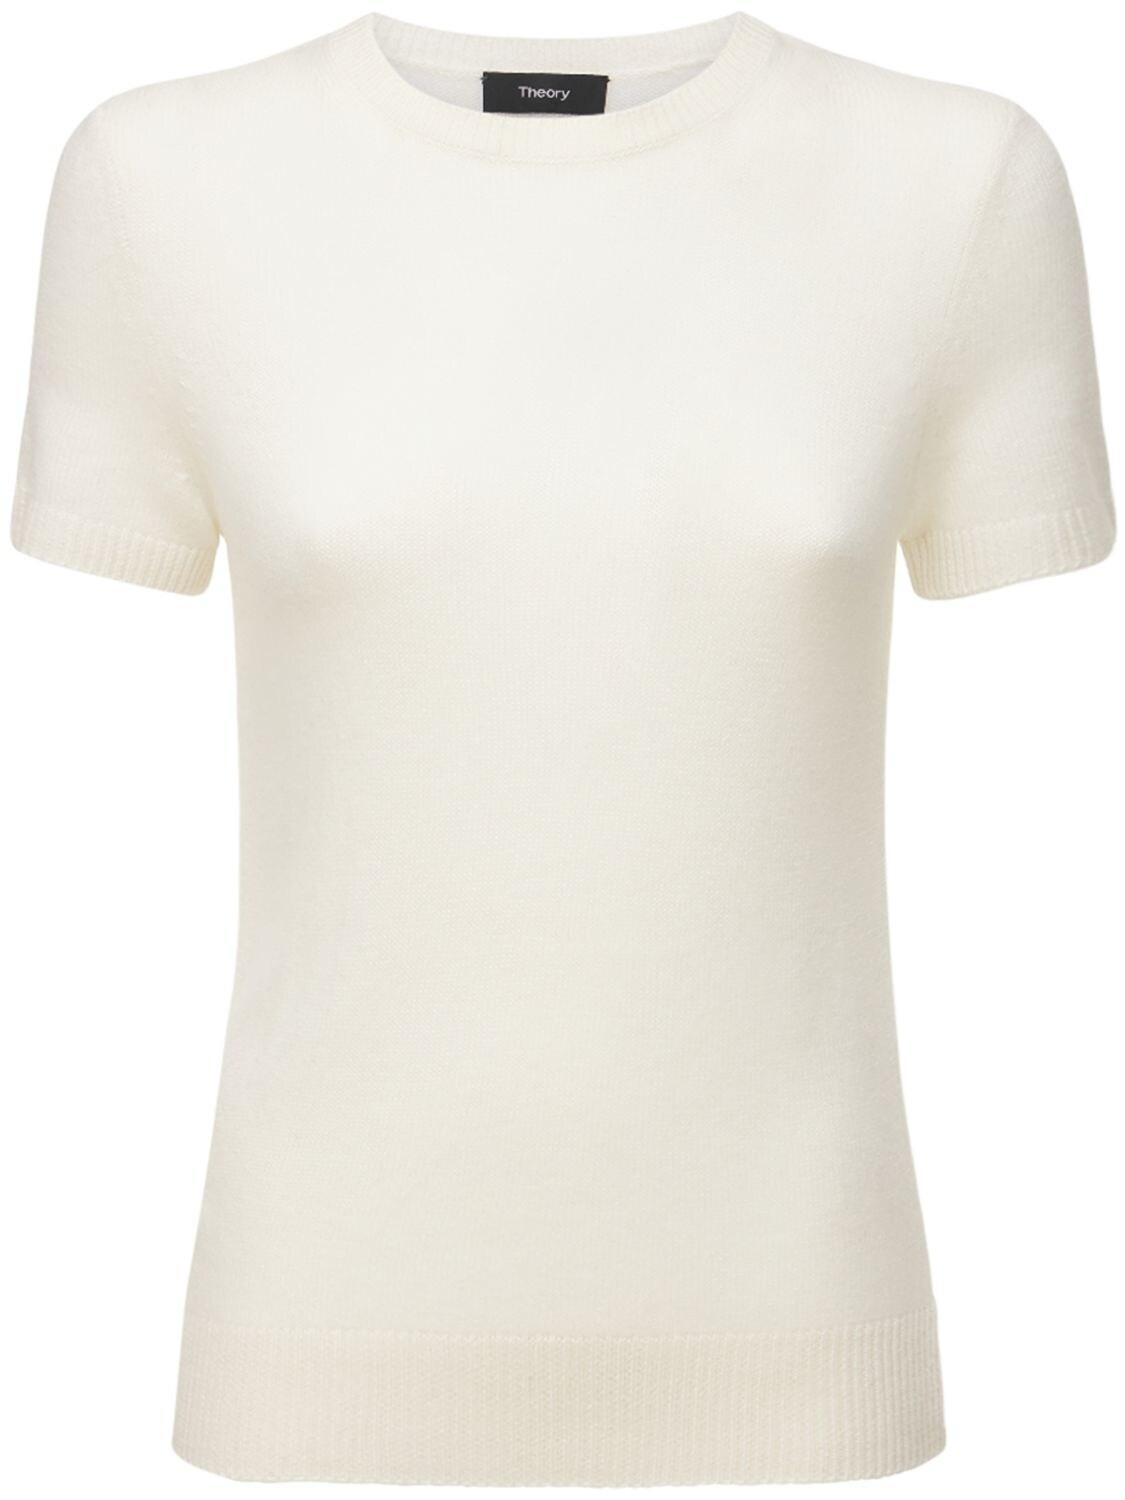 Theory Cashmere T-shirt in White - Lyst